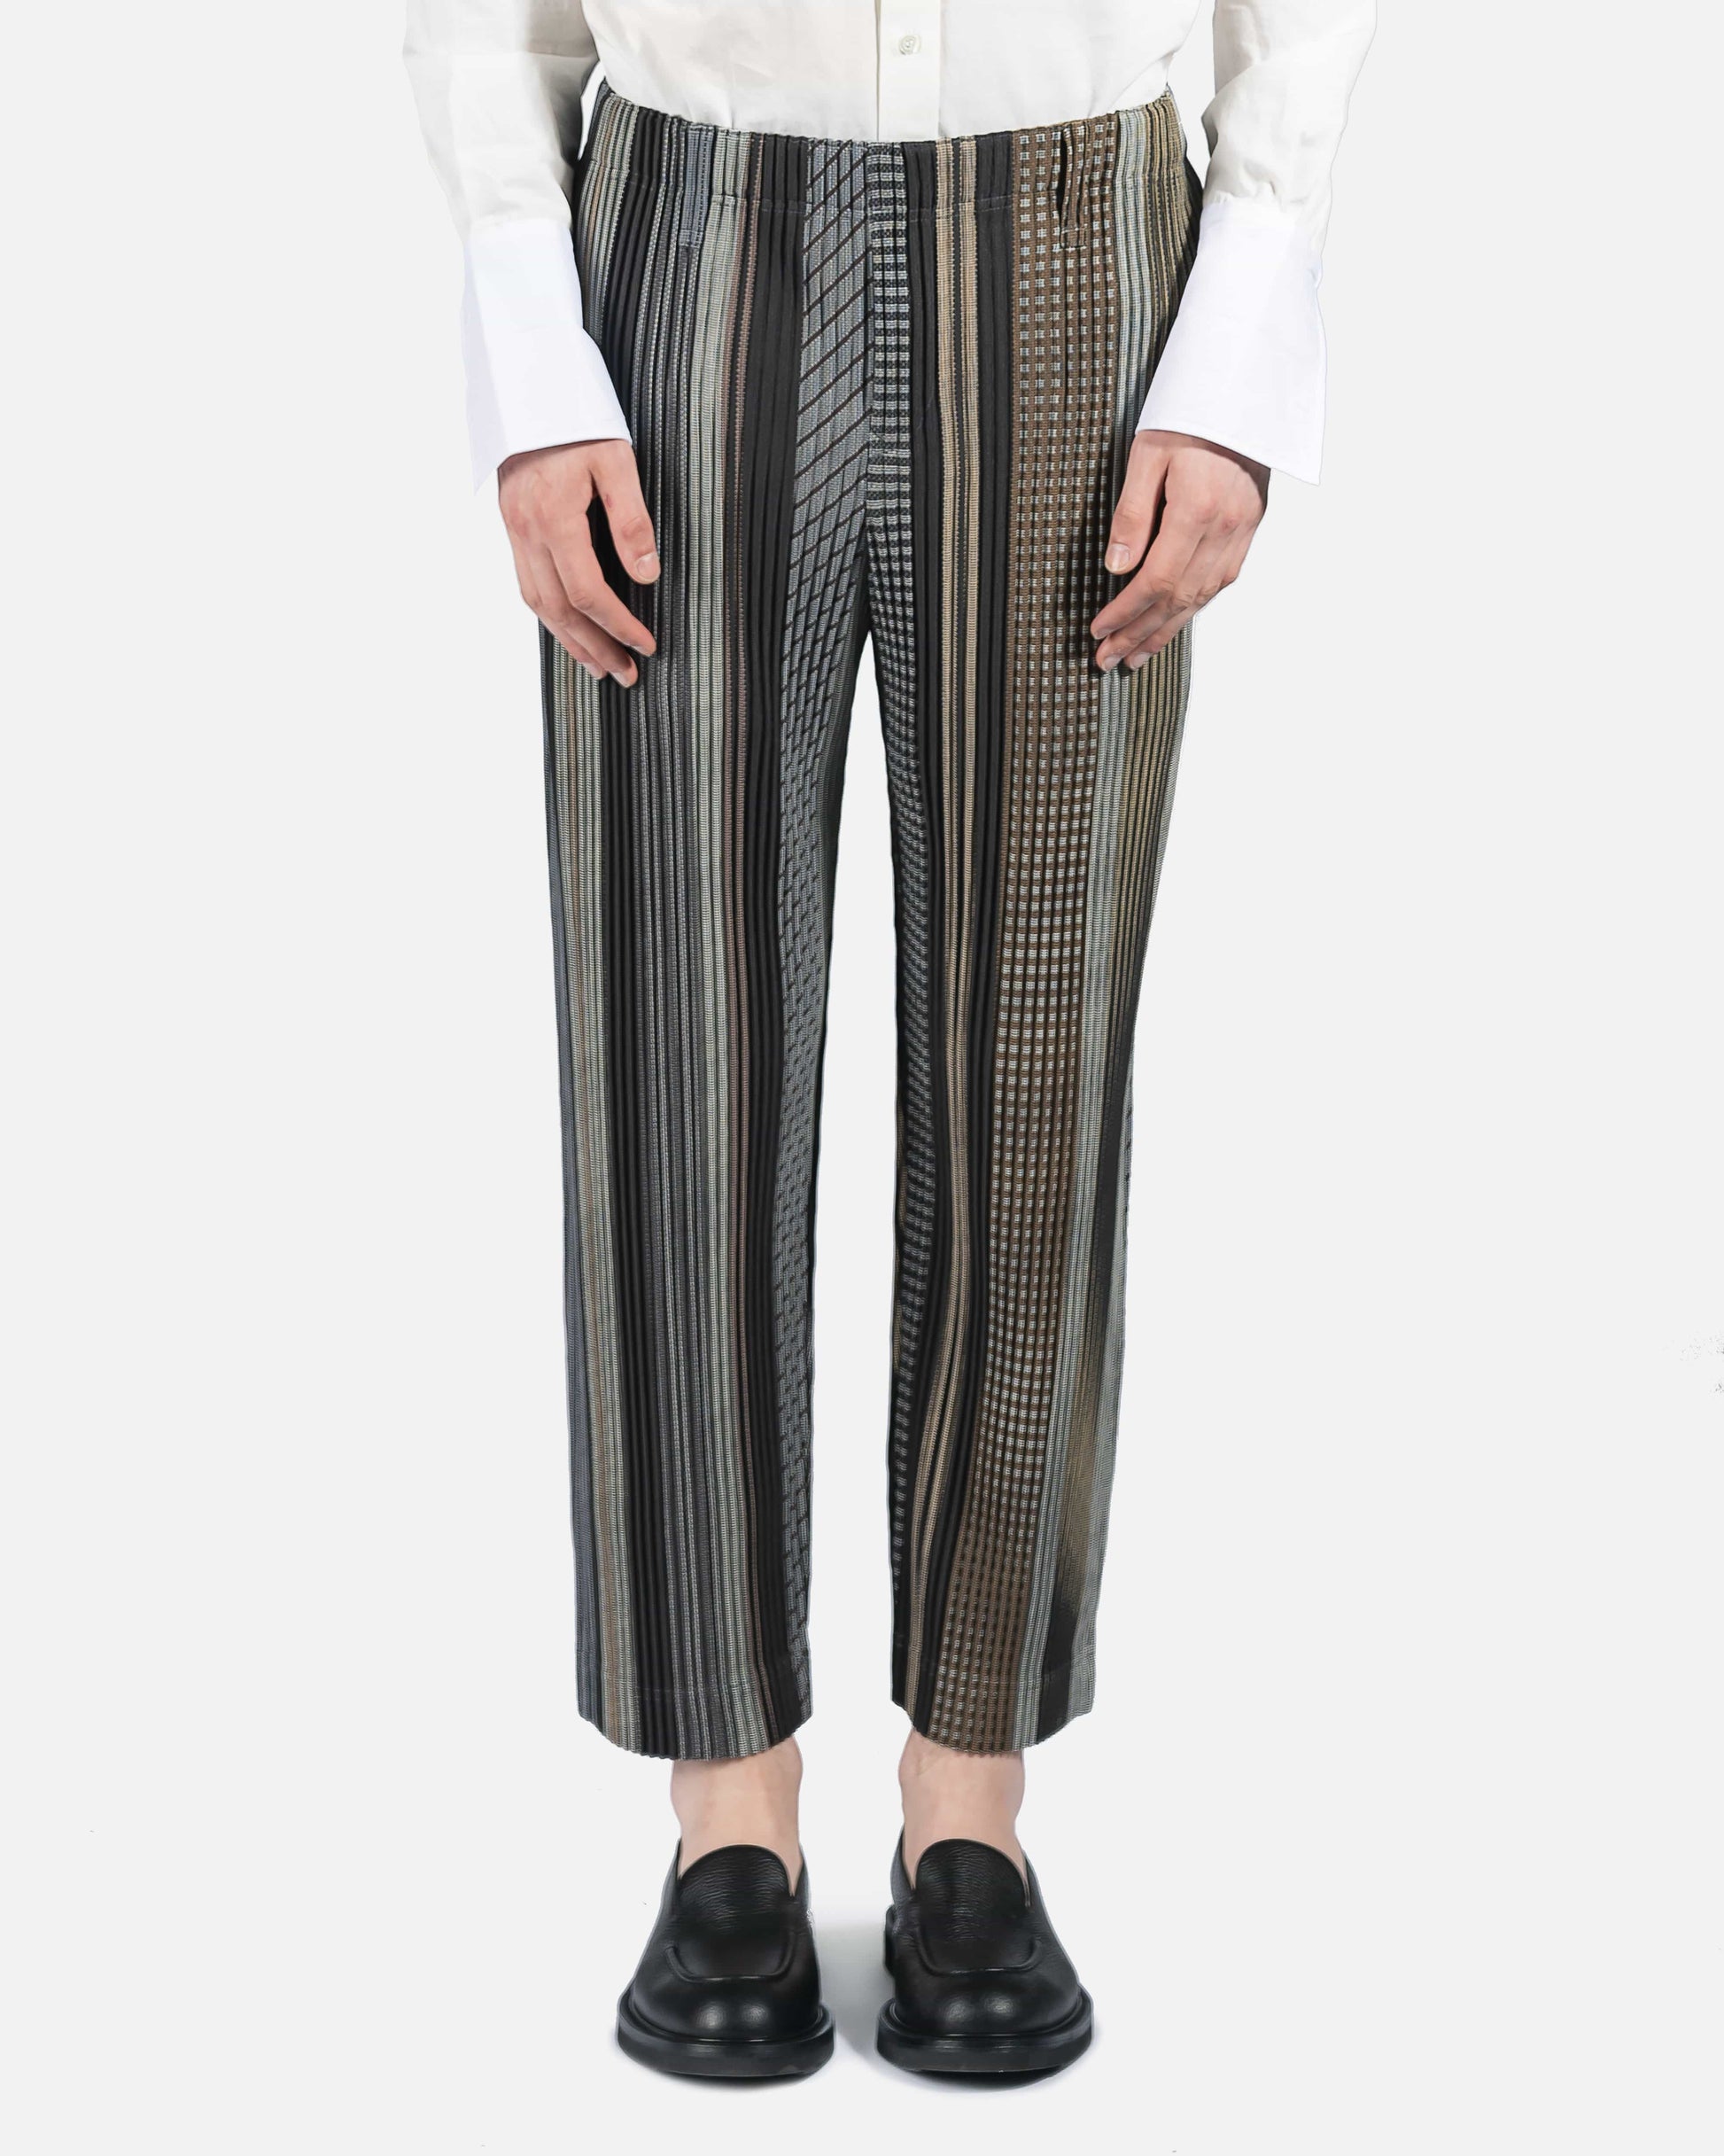 Homme Plissé Issey Miyake Men's Pants Woven Structure Trousers in Brown